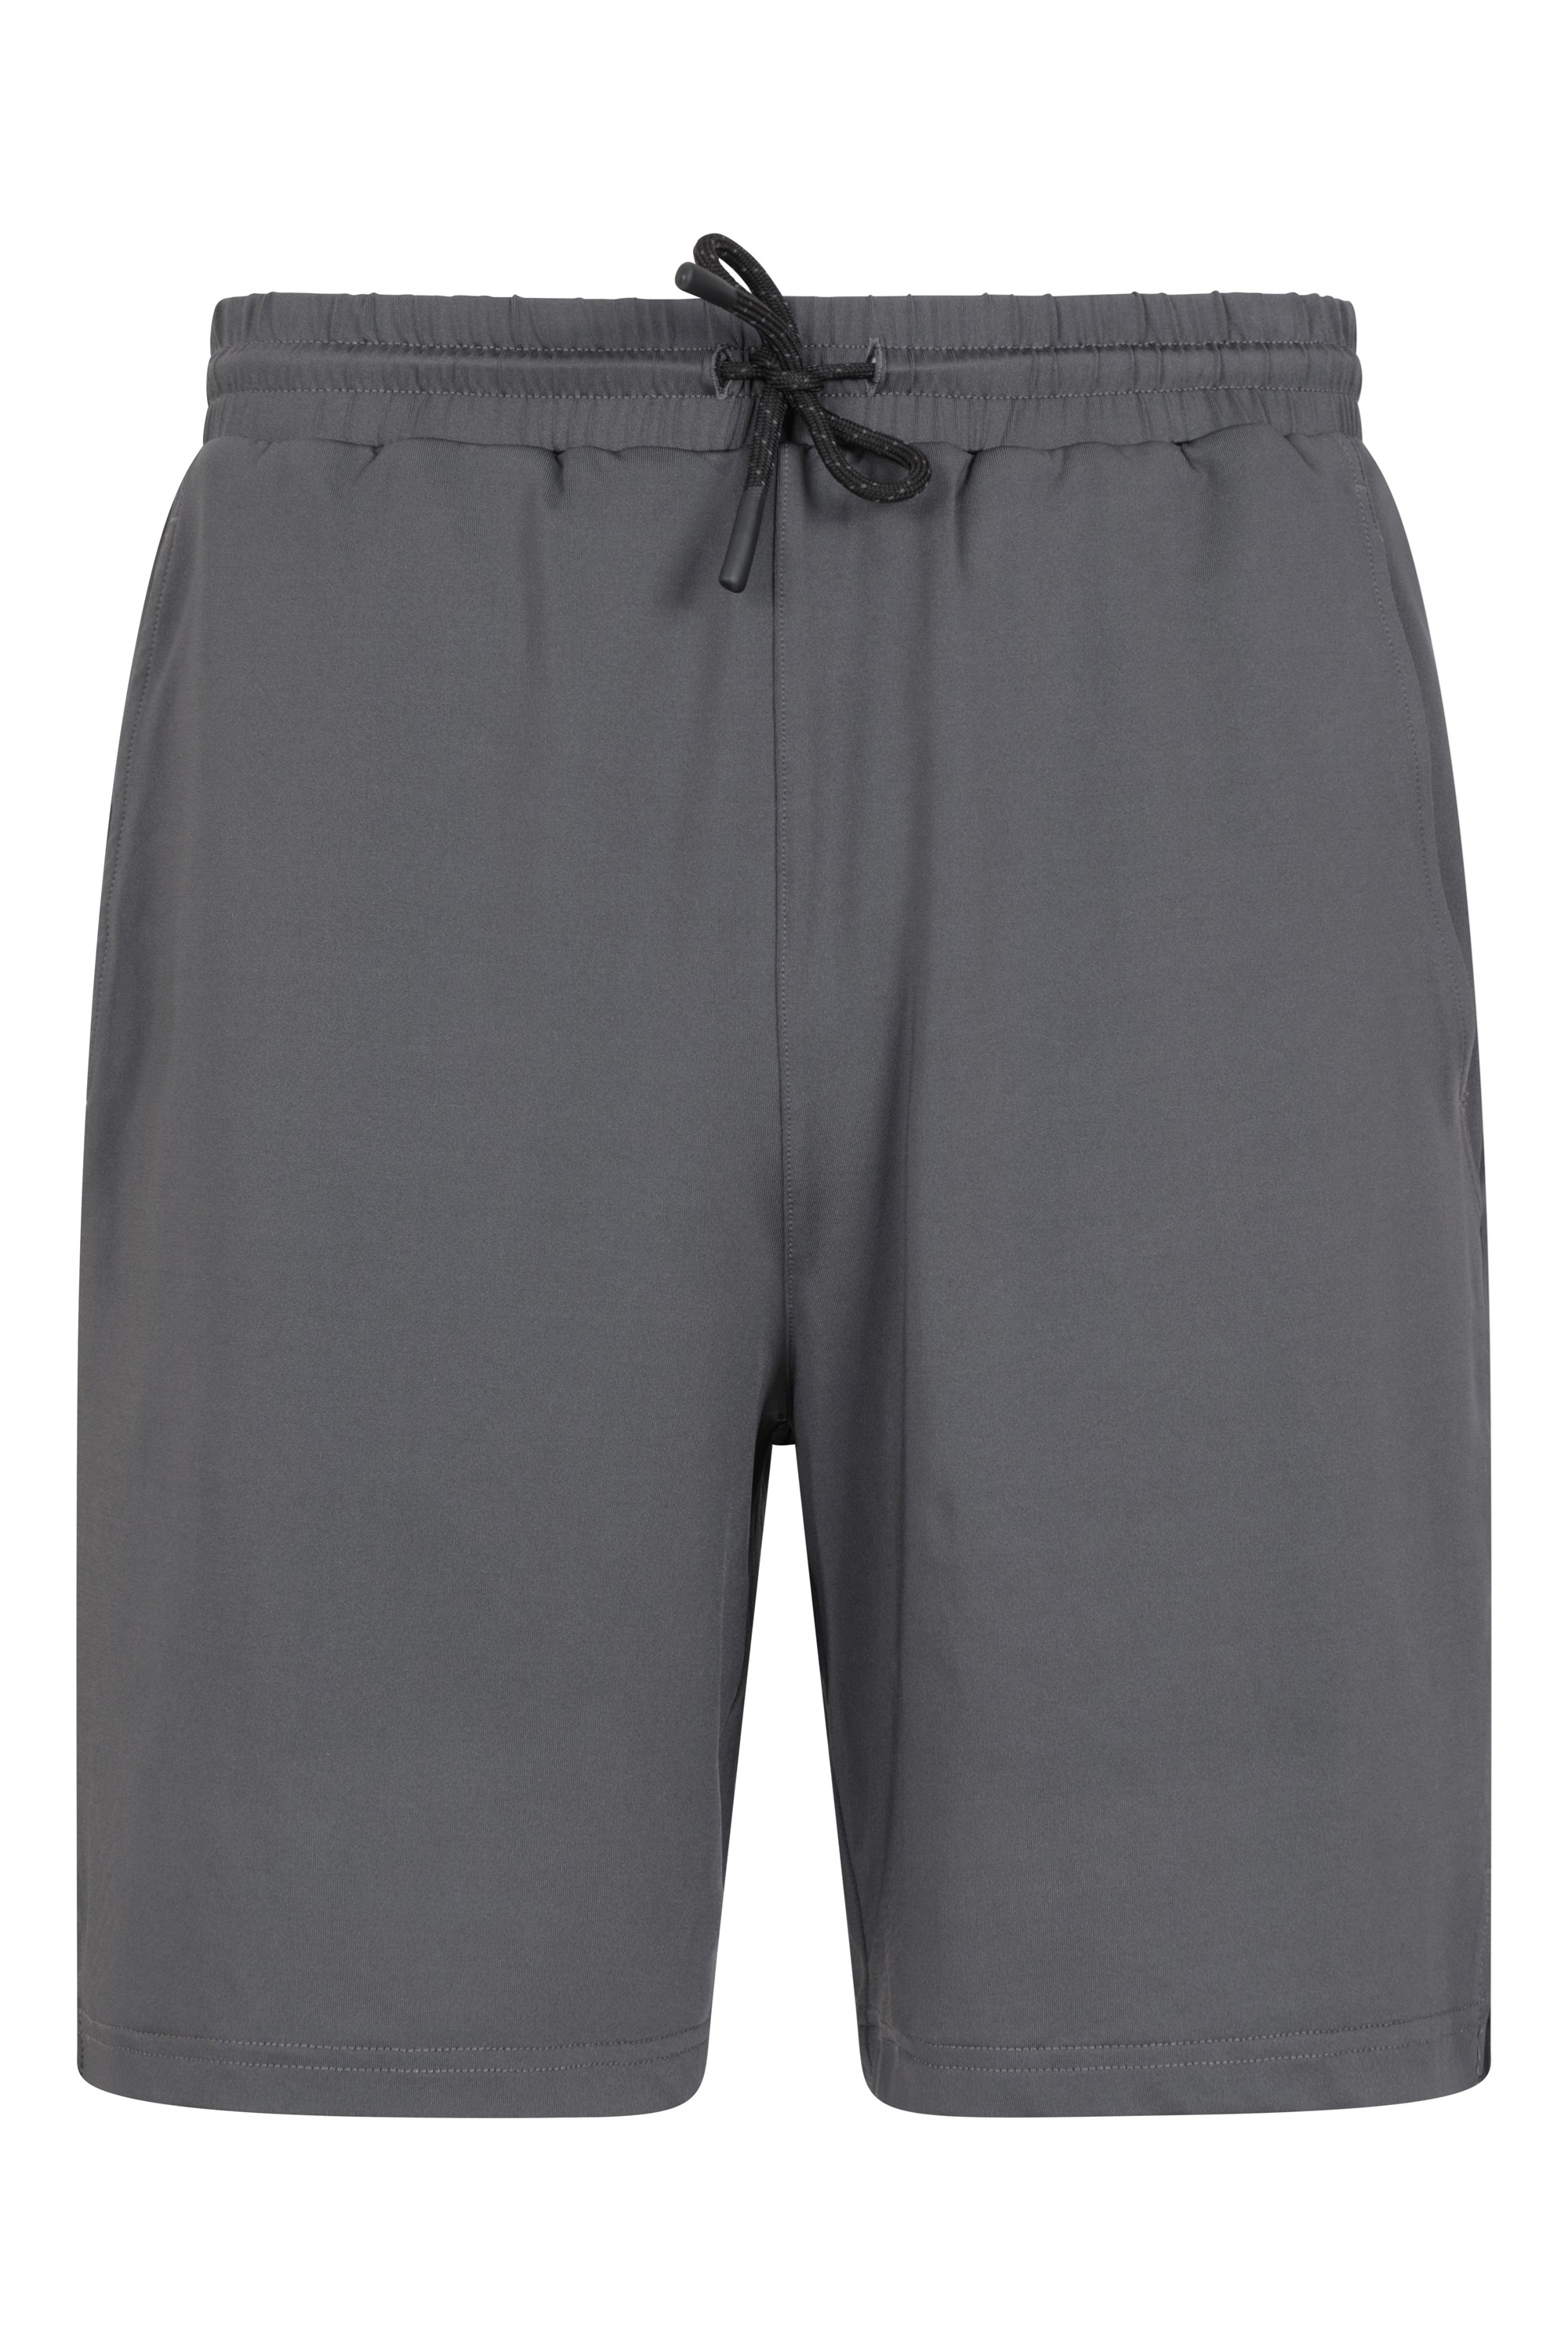 Core Ii Mens Recycled Running Shorts - Grey